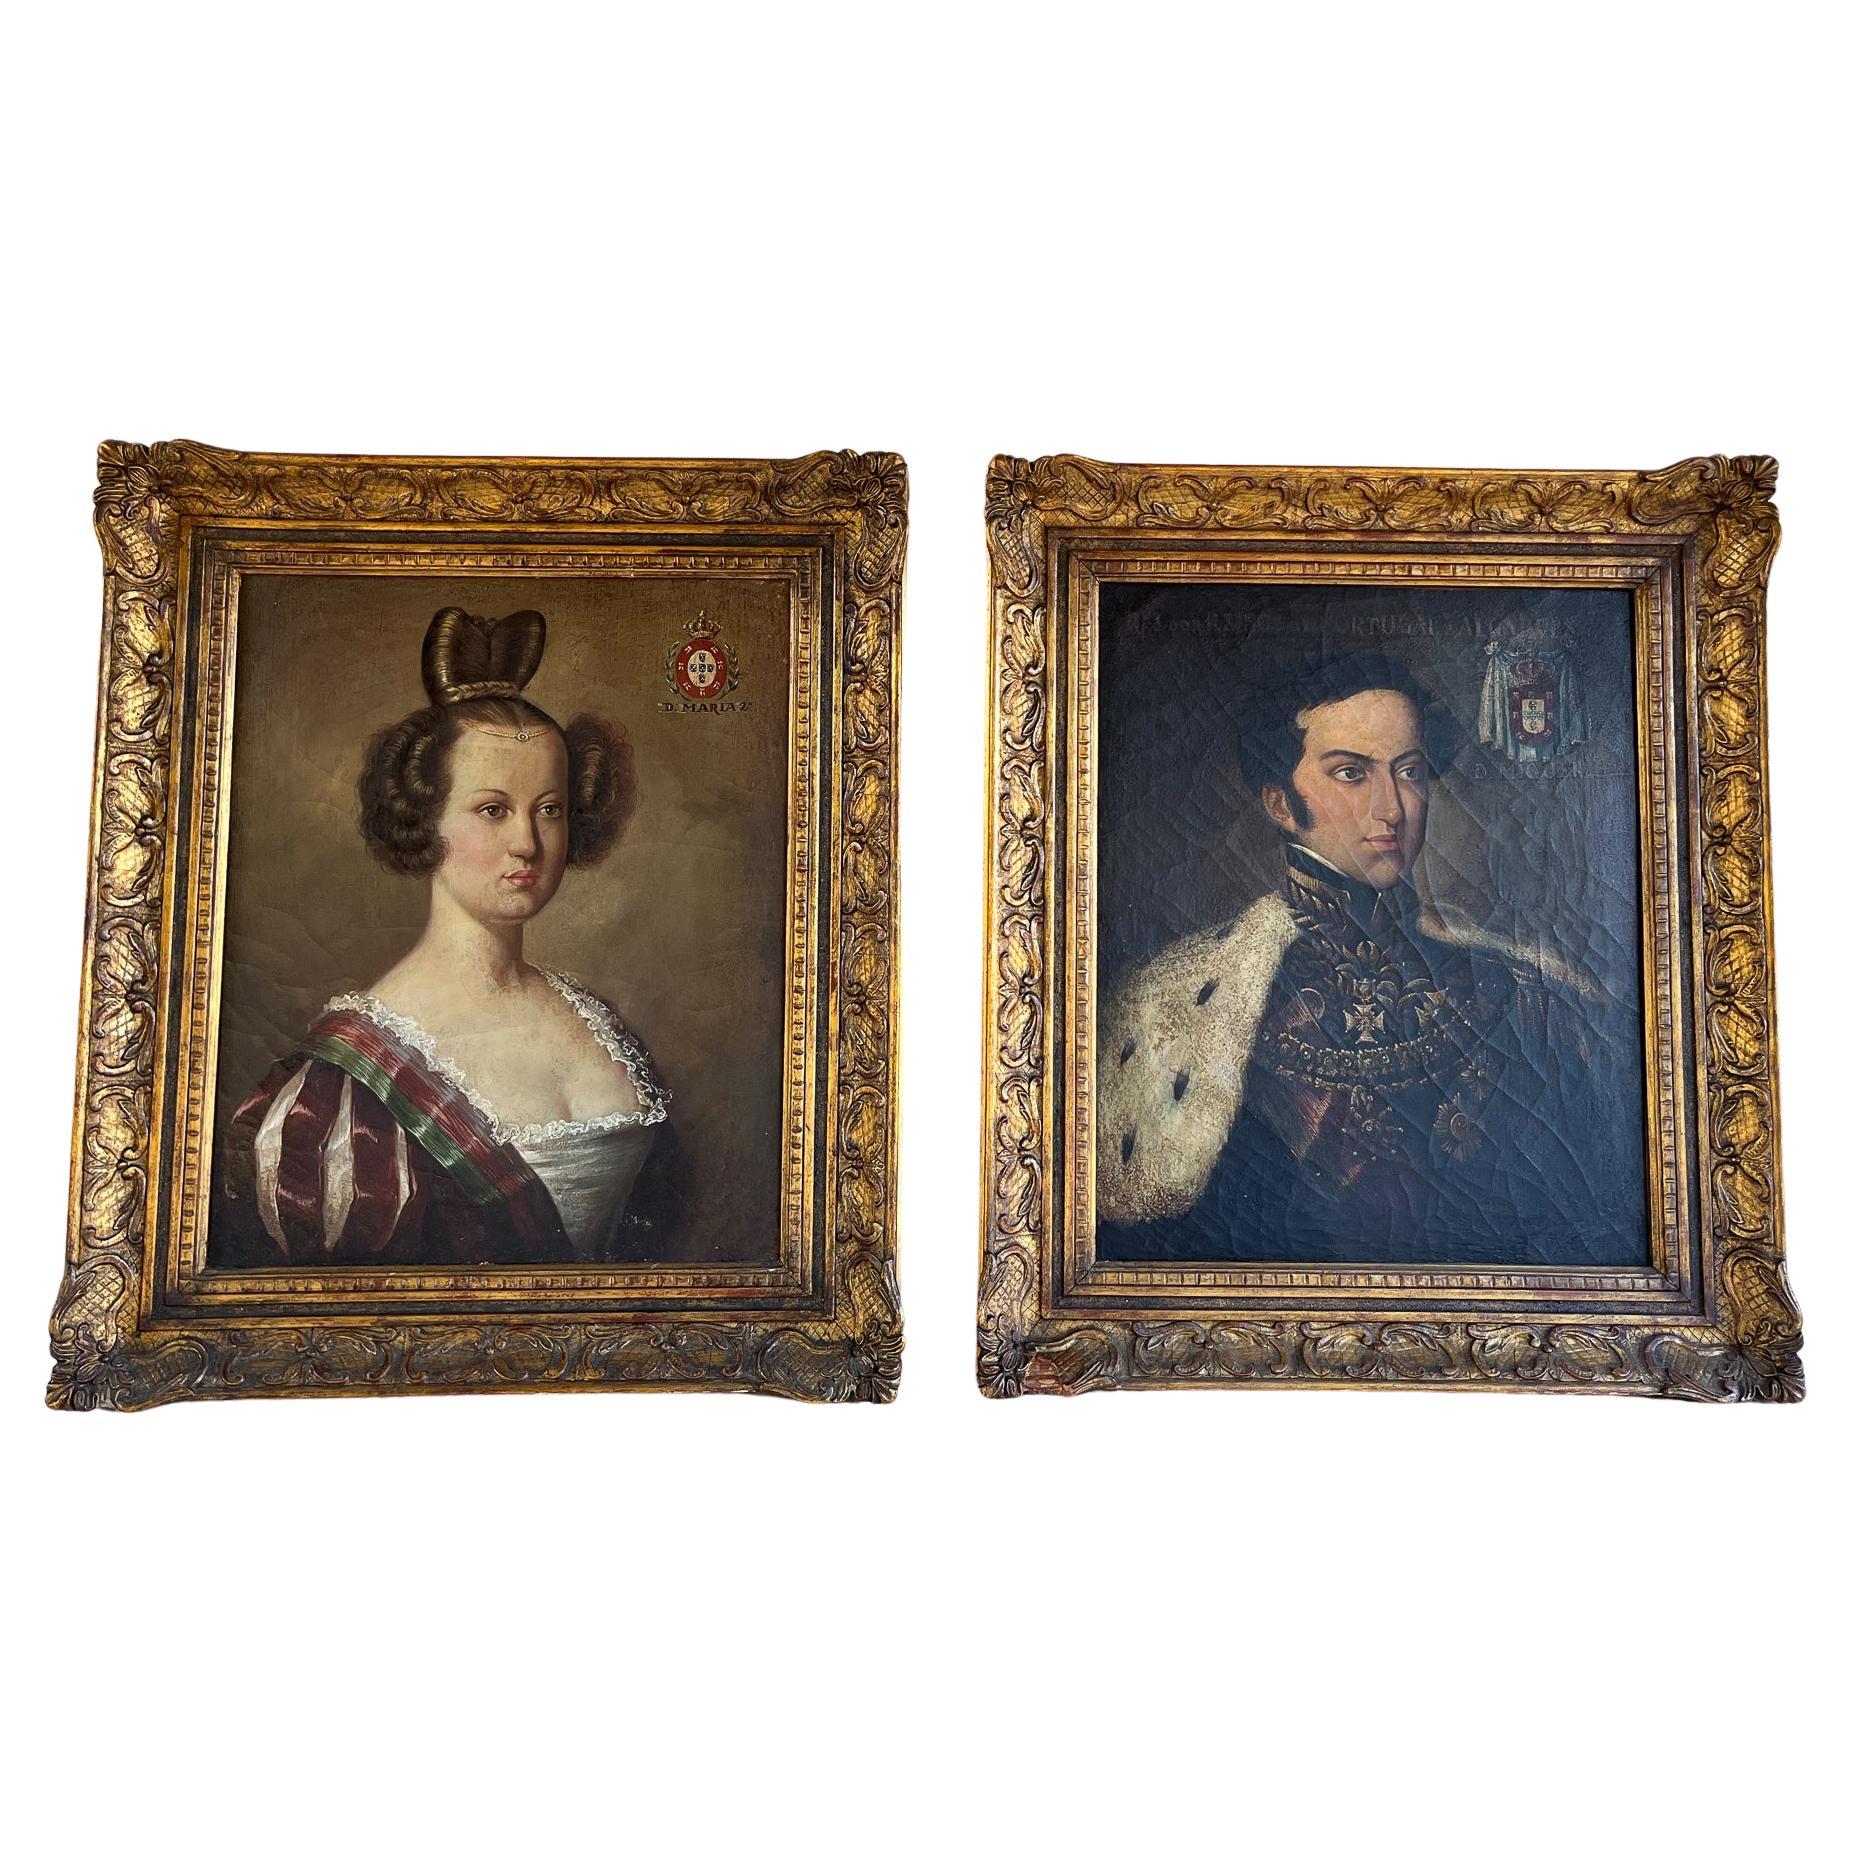 Pair of Portraits of Dom Miguel and Dona Maria ii, 19th Century Portugal